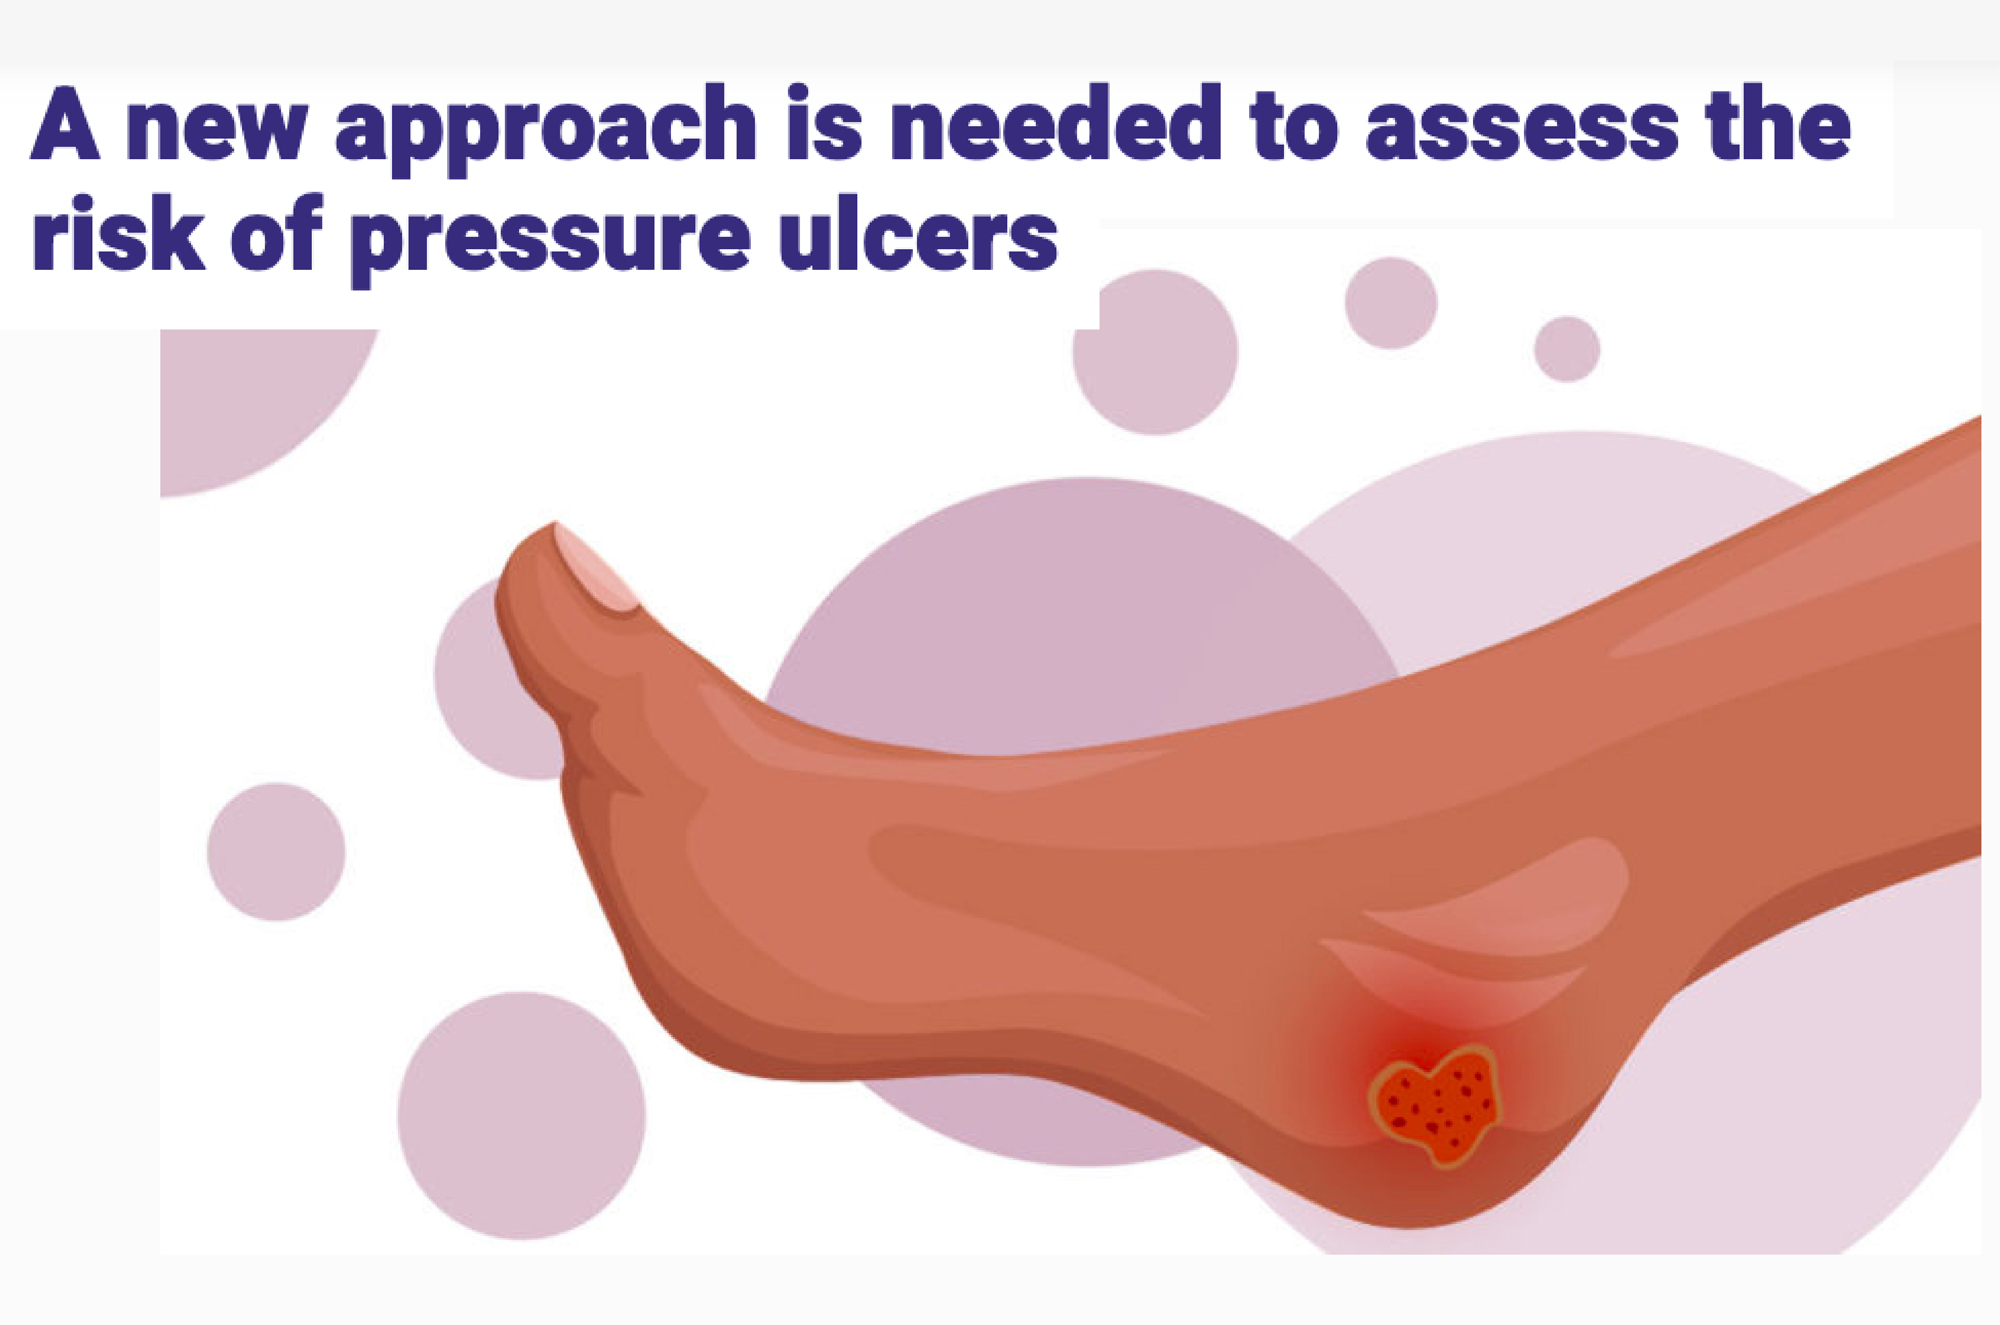 a new approach is needed to assess the risk of pressure ulcers